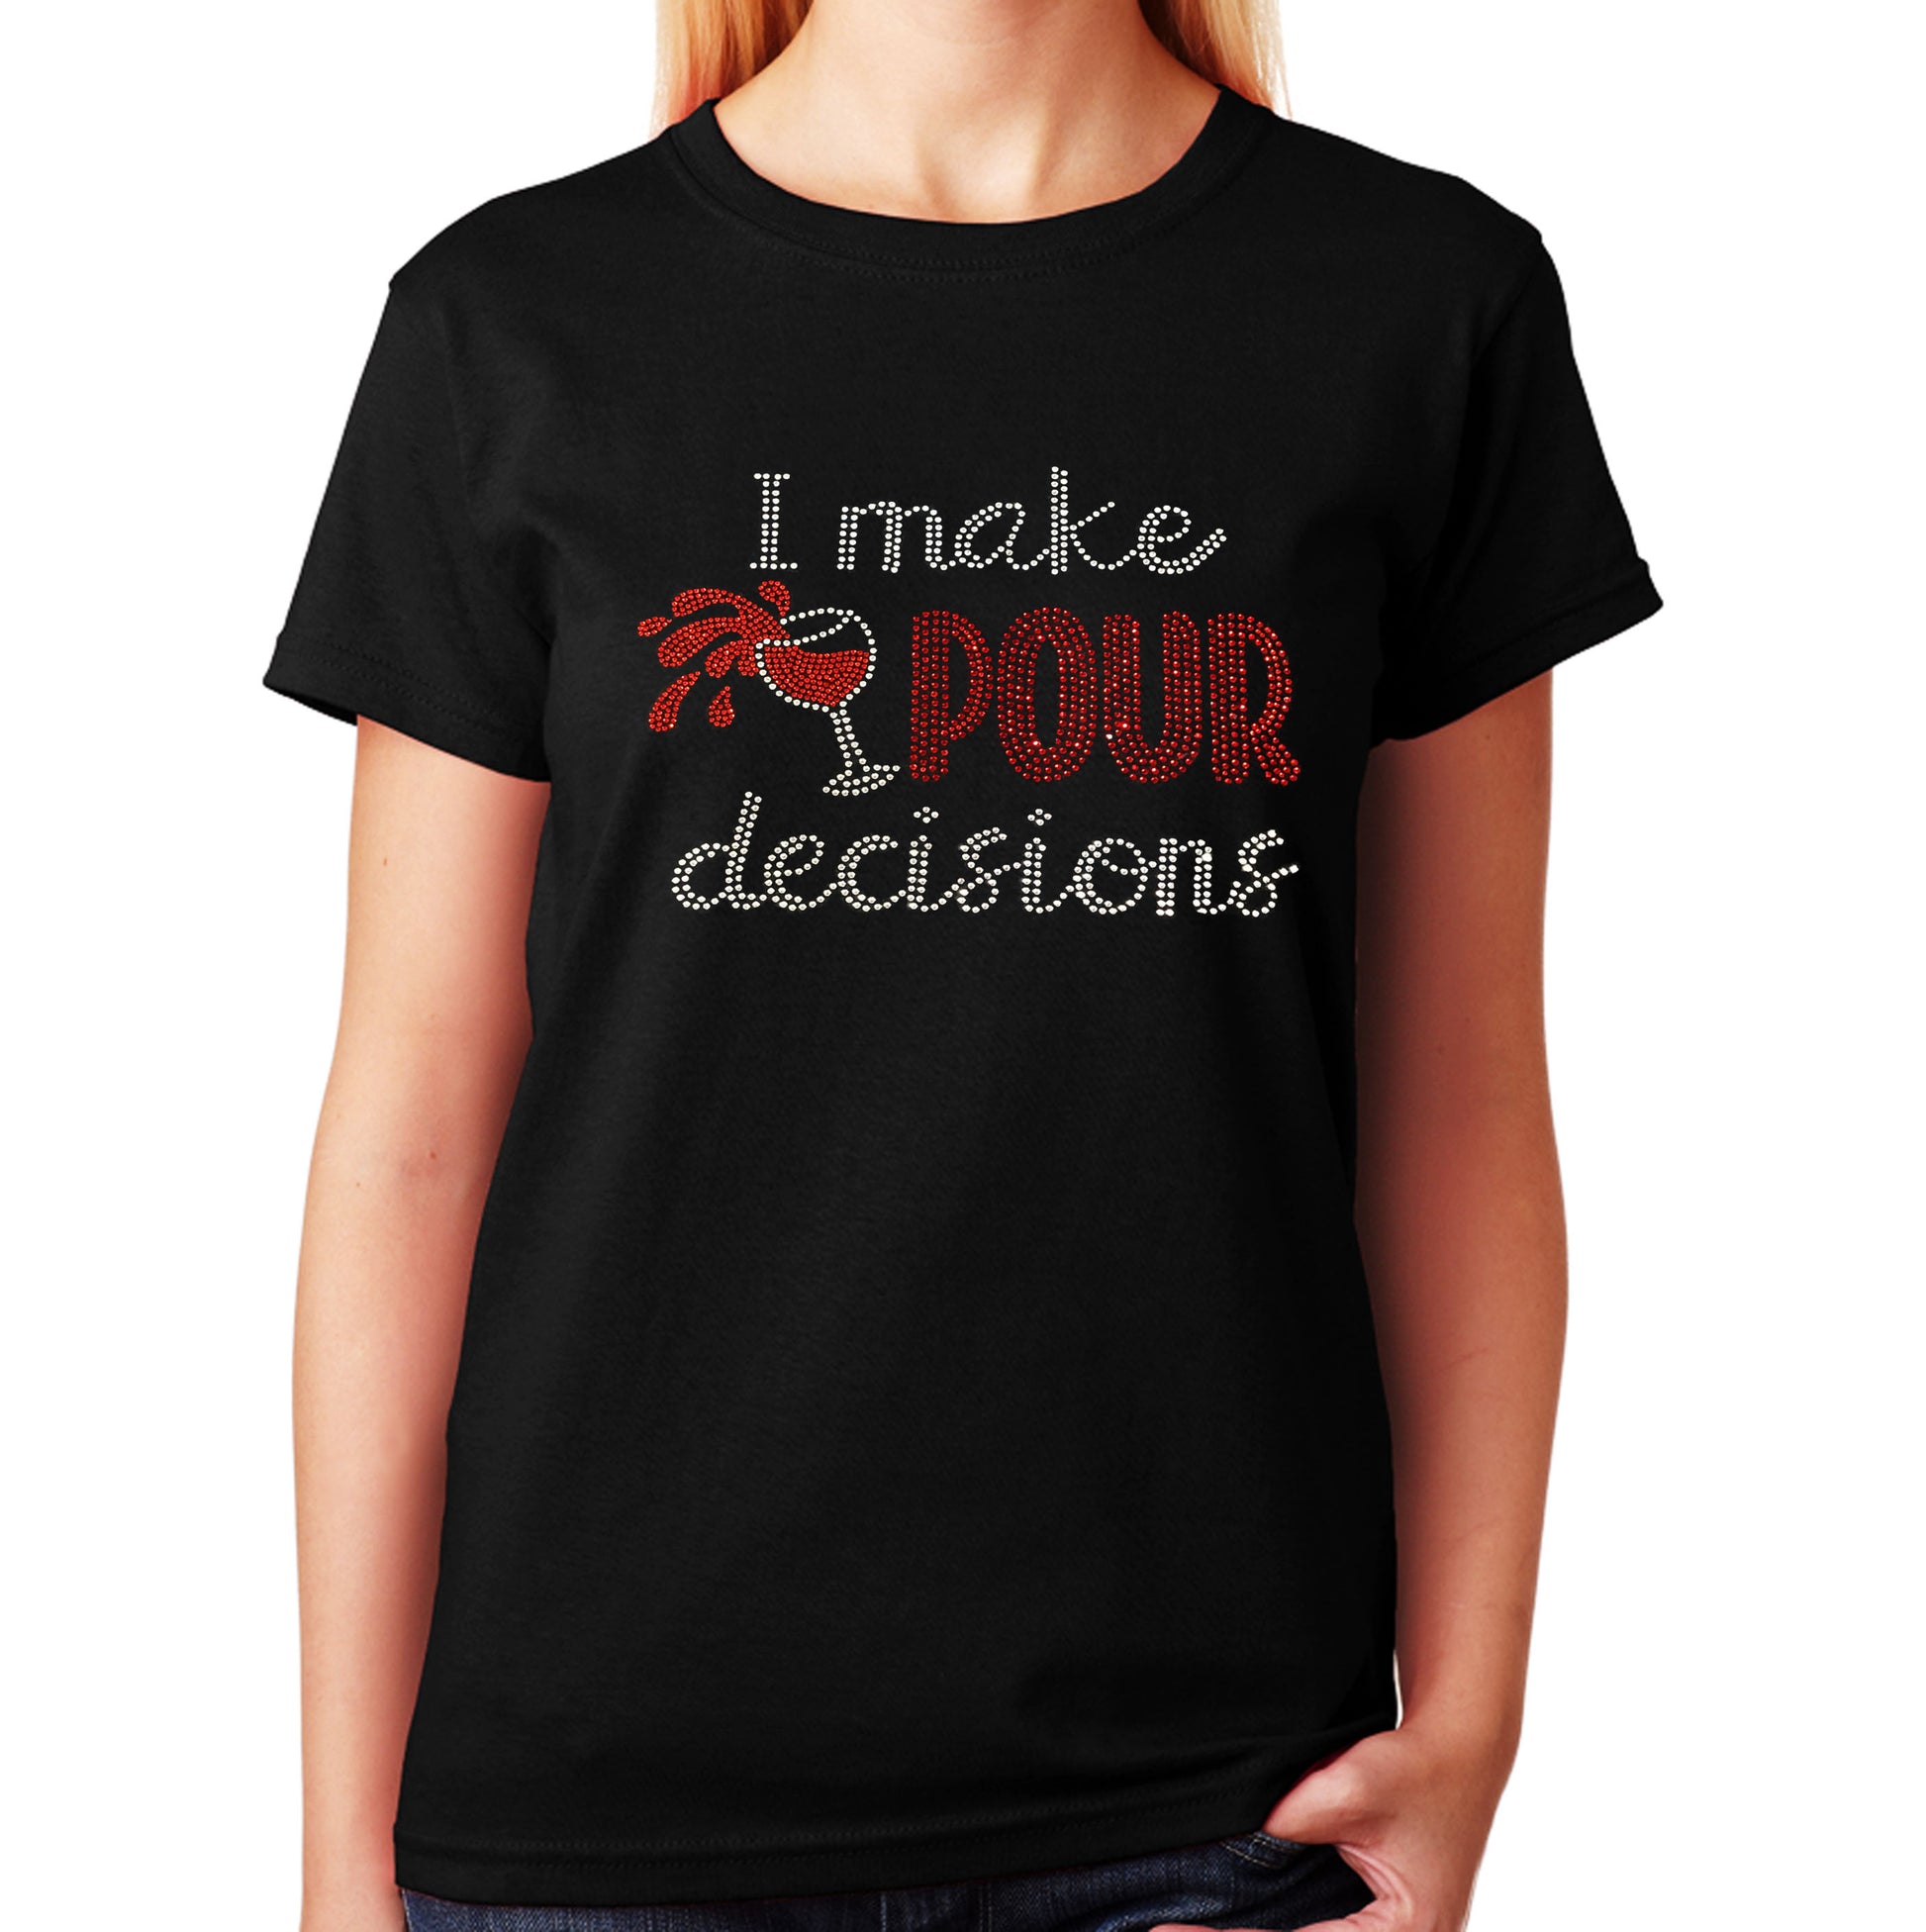 I Make Pour Decisions Wine Cup in Rhinestones